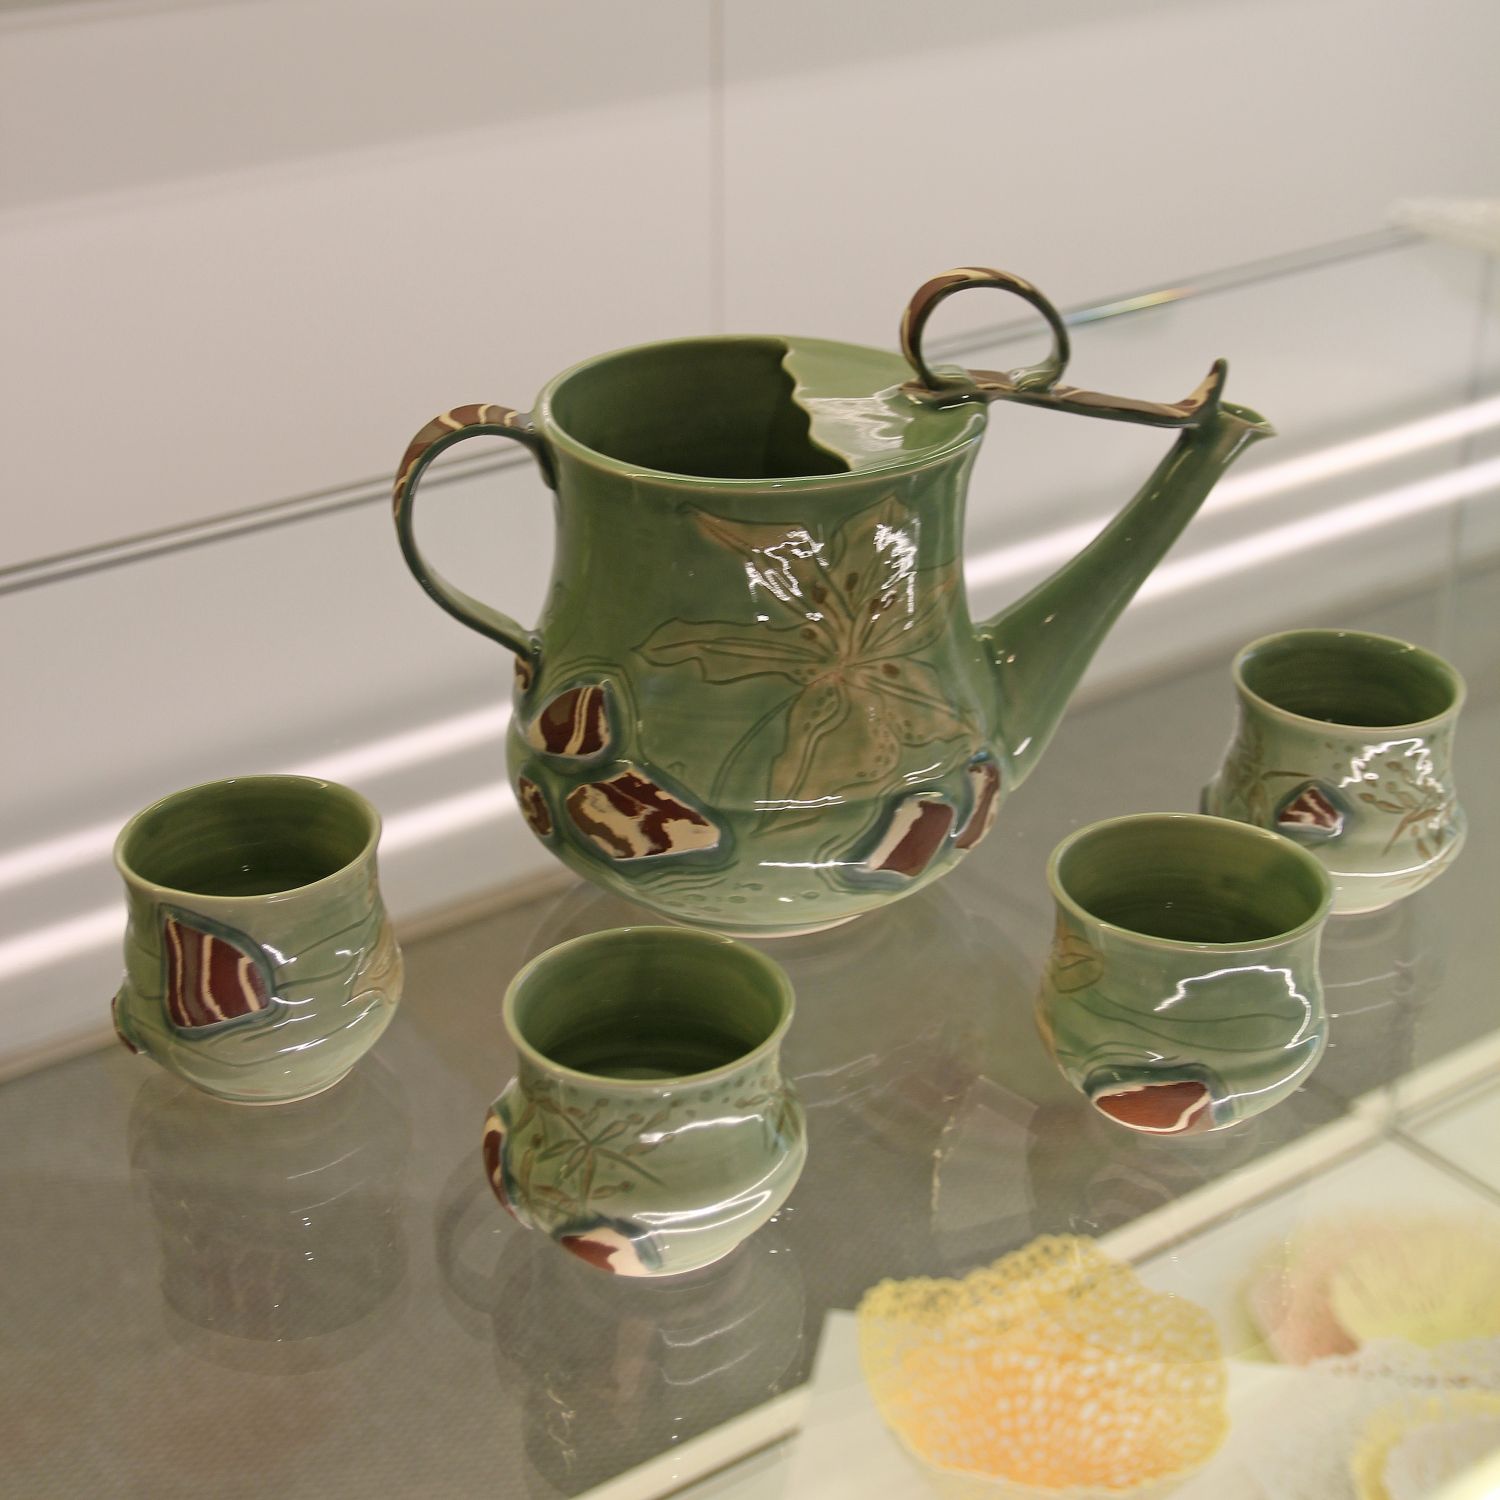 Kristina Rose Studios: Jug and Four Cups (Sold as a set of five) Product Image 5 of 6